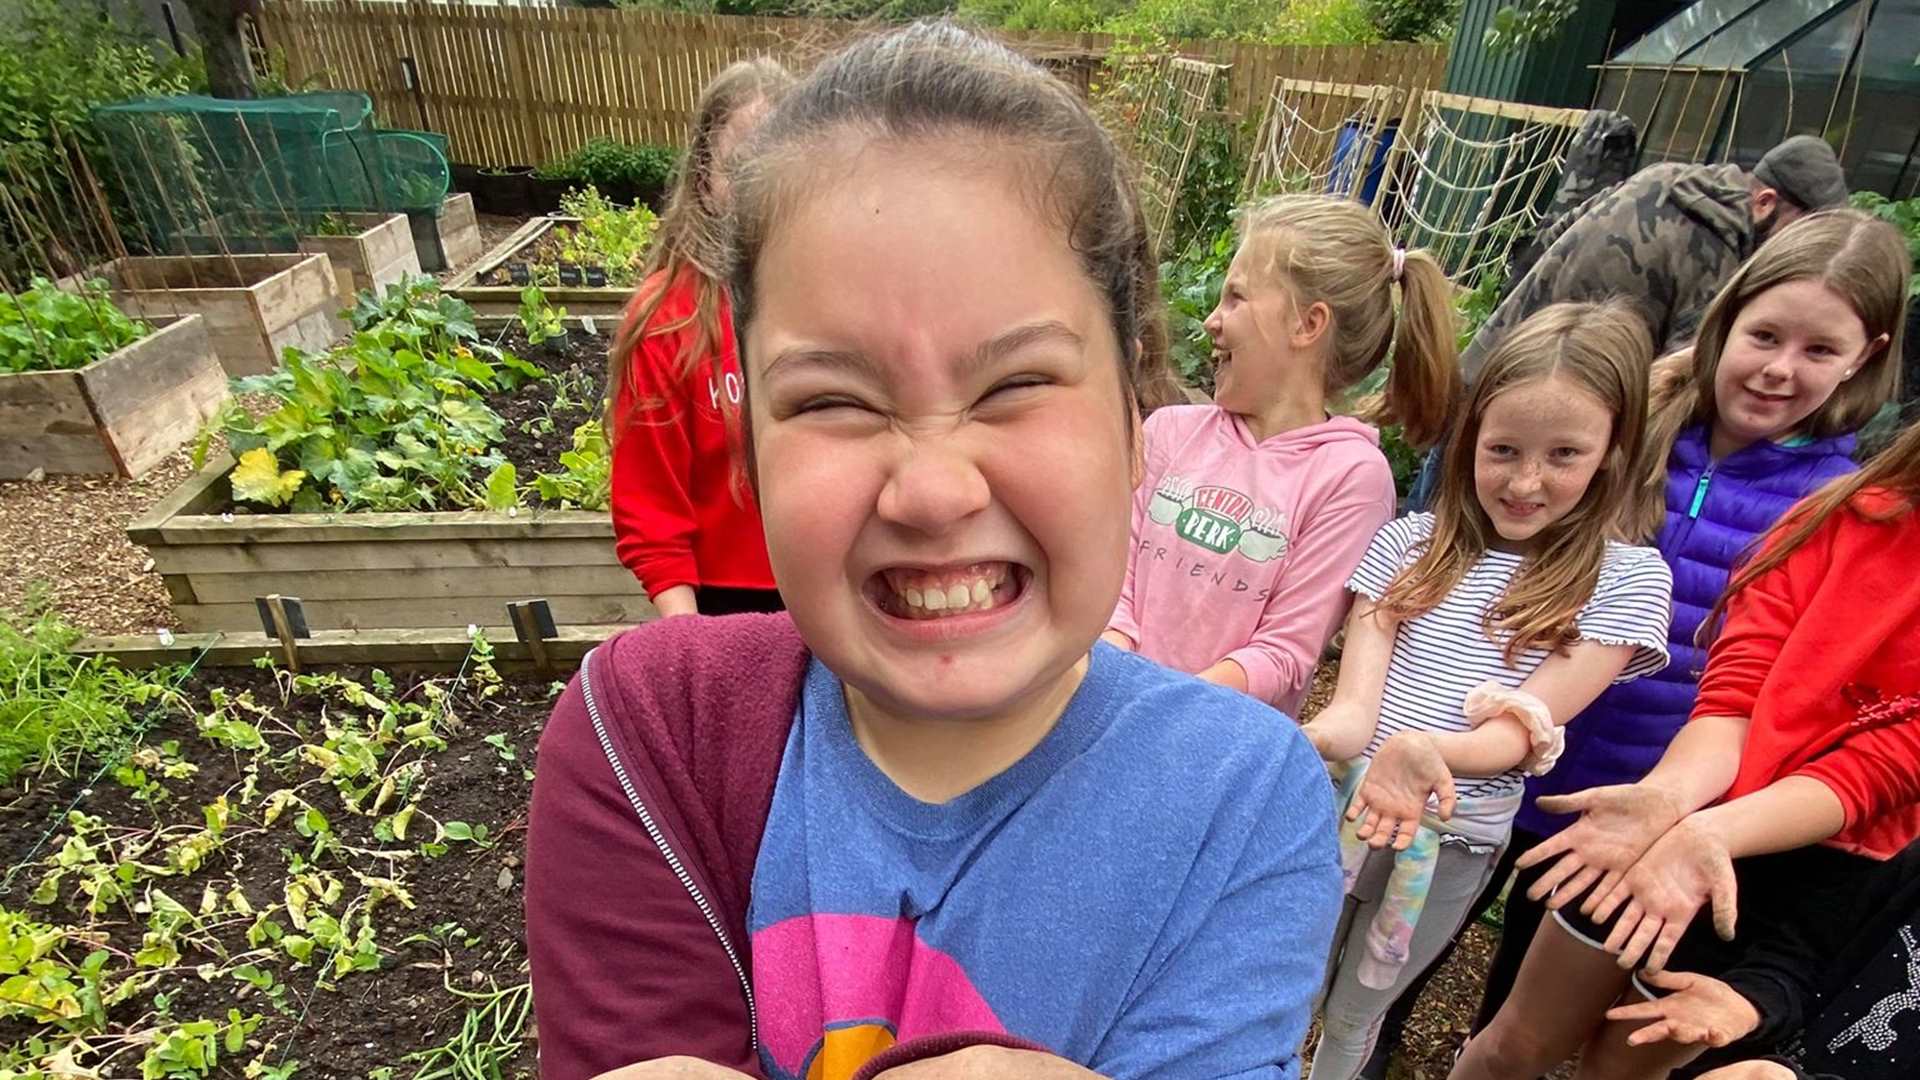 A child smiling and showing her muddy hands to the camera in a community garden